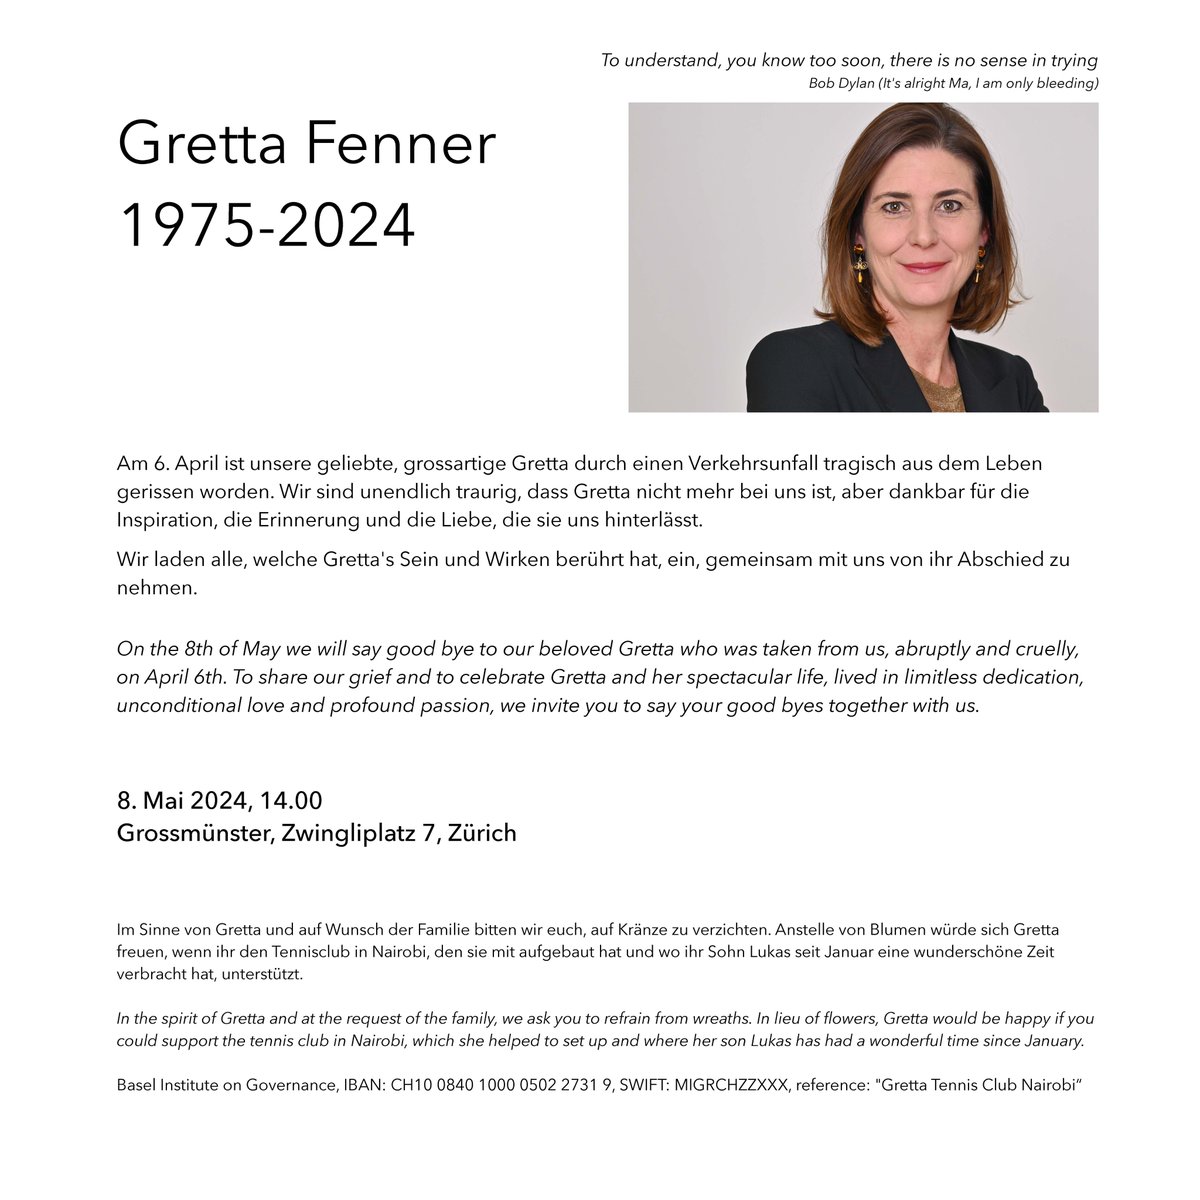 A memorial service for Gretta Fenner will be held on Wednesday, 8 May at the Grossmünster in Zurich. Gretta's family invites all who share in their grief at her passing to come and say our goodbyes together. Live streaming will be available for those unable to attend in person.